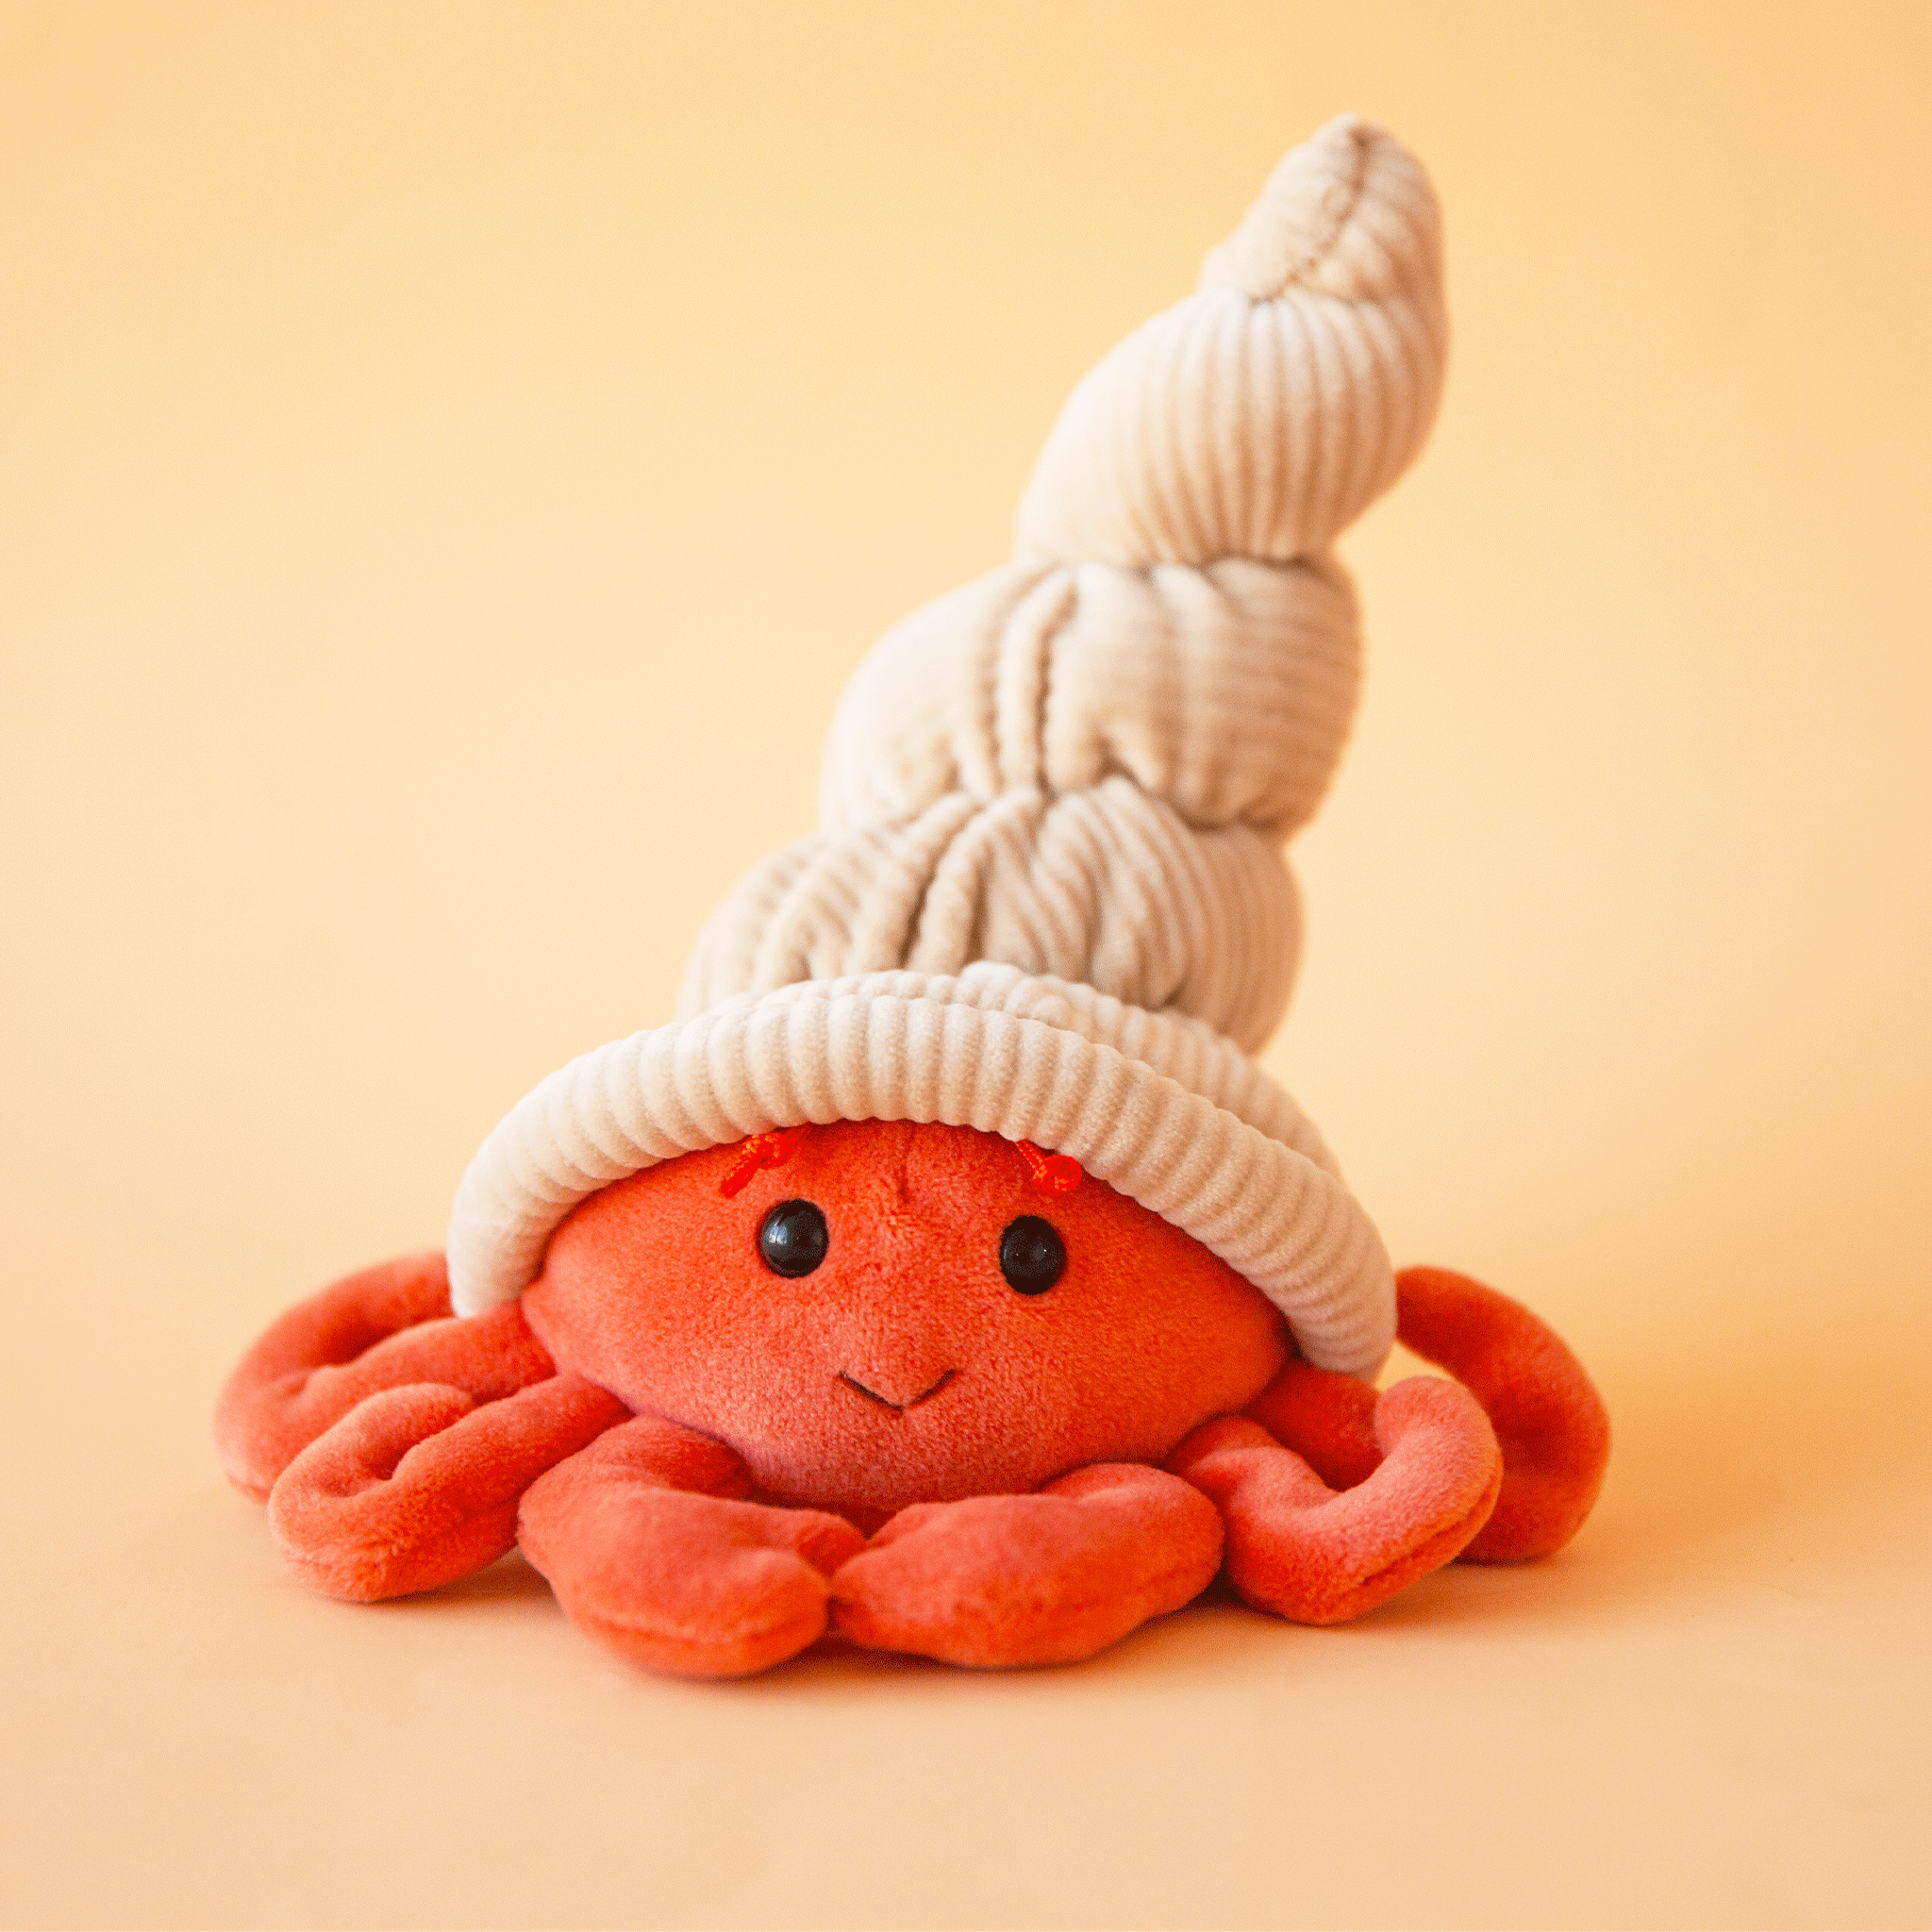 On a tan background is a red hermit crab stuffed animal toy.